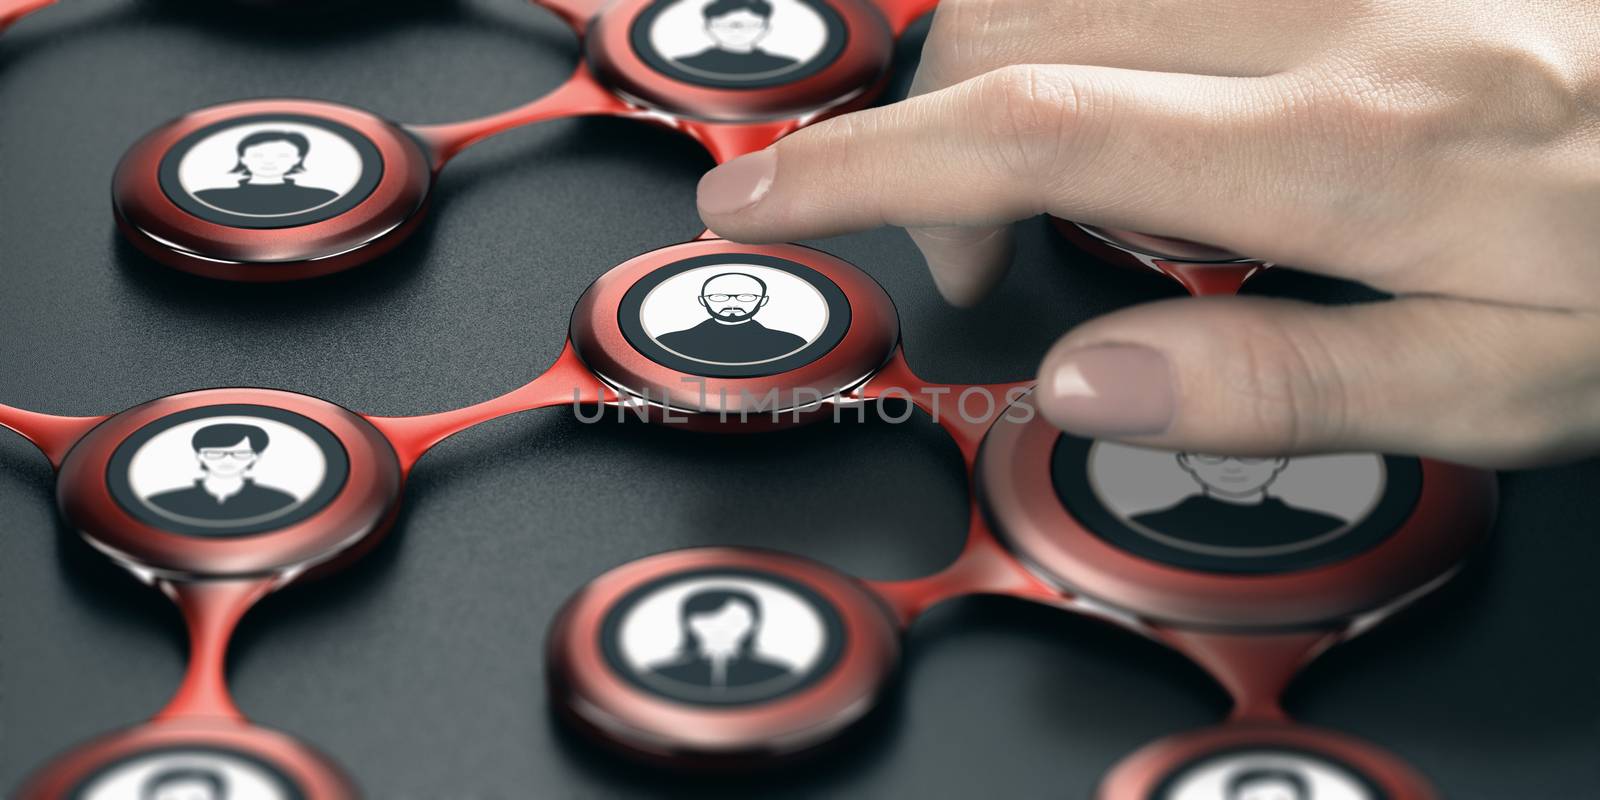 Finger pressing an avatar to select a contact inside a business network. Composite image between a hand photography and a 3D background.